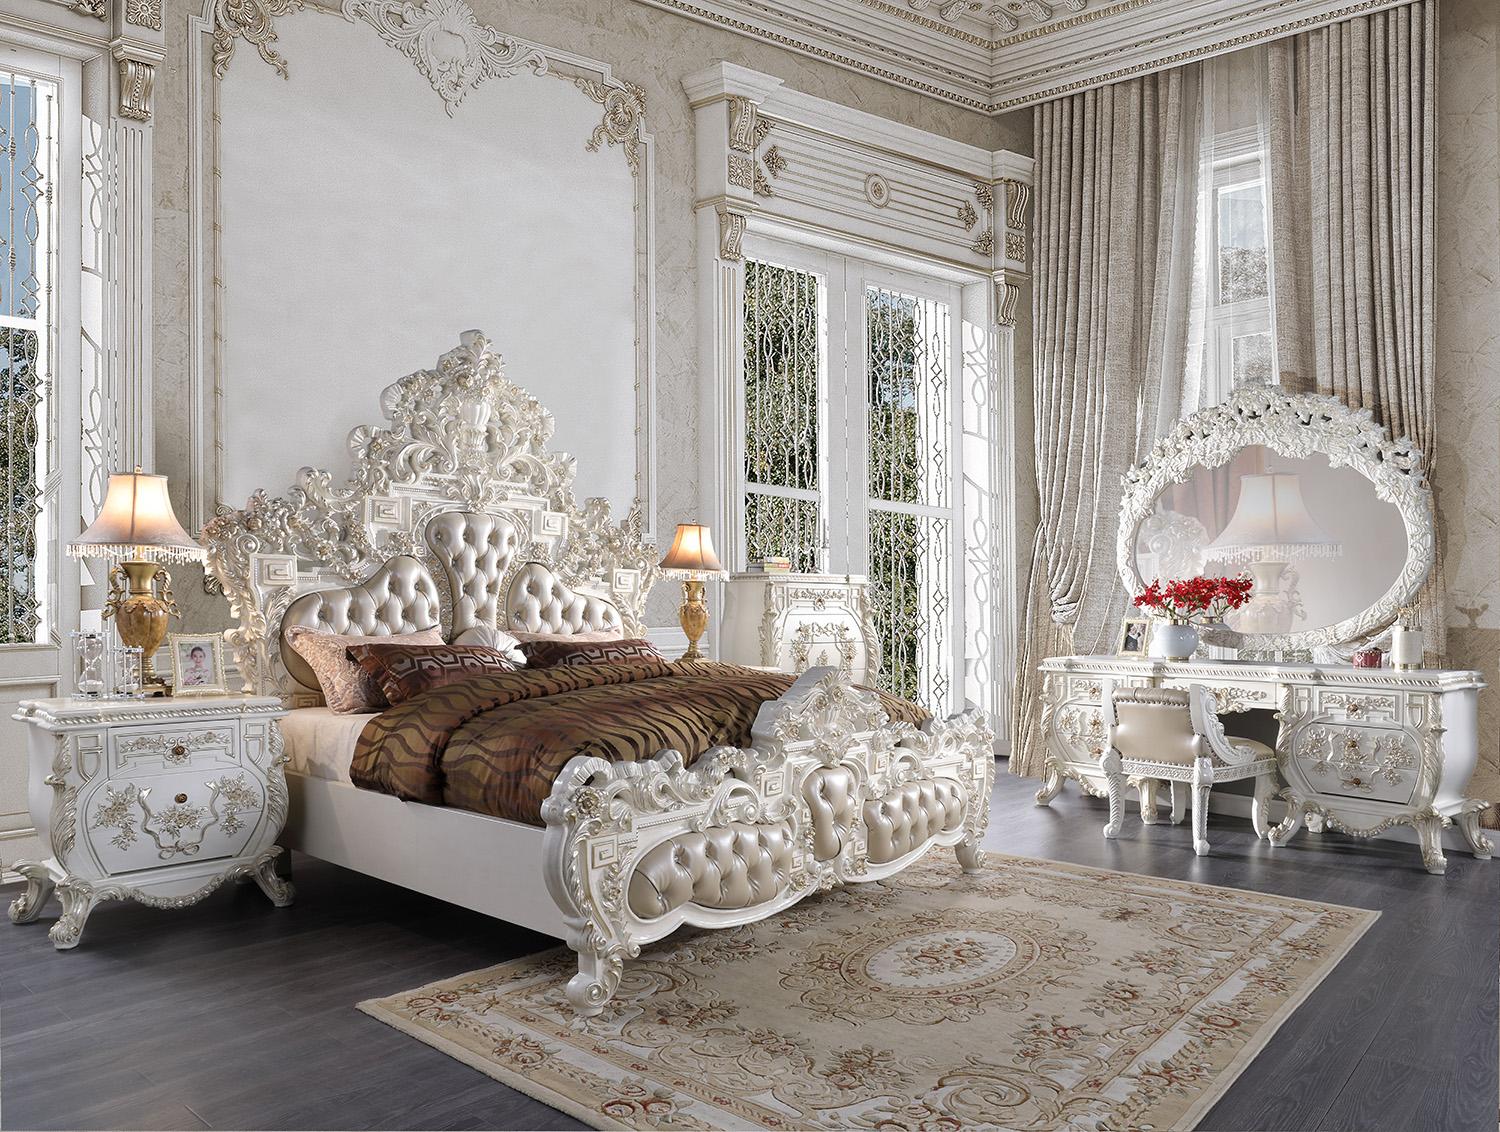 

    
Pearl Cream & White Tufted King Bedroom Set 5Pcs Traditional Homey Design HD-1807
